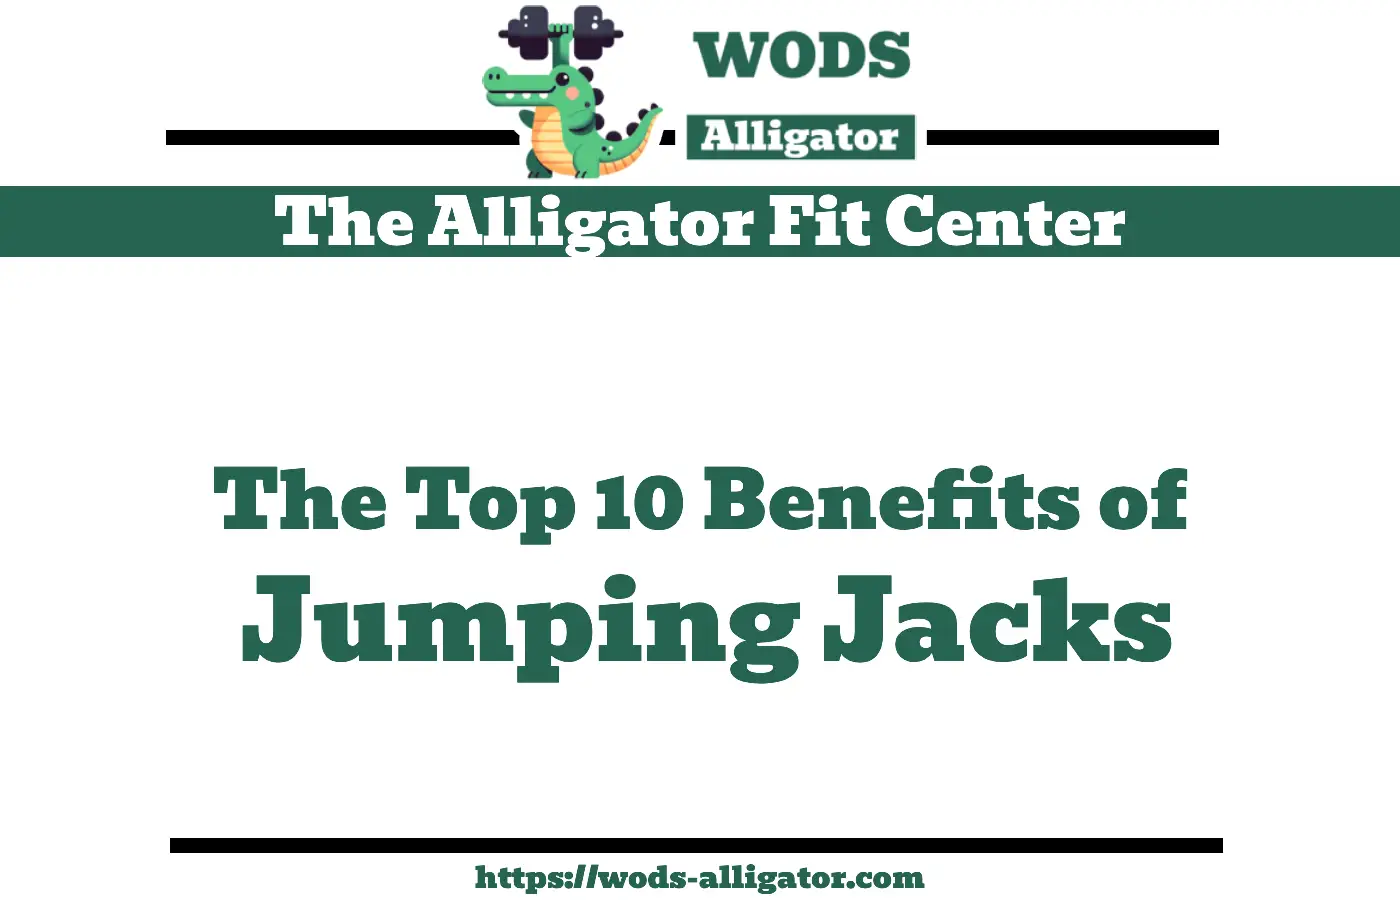 The Top 10 Benefits of Jumping Jacks